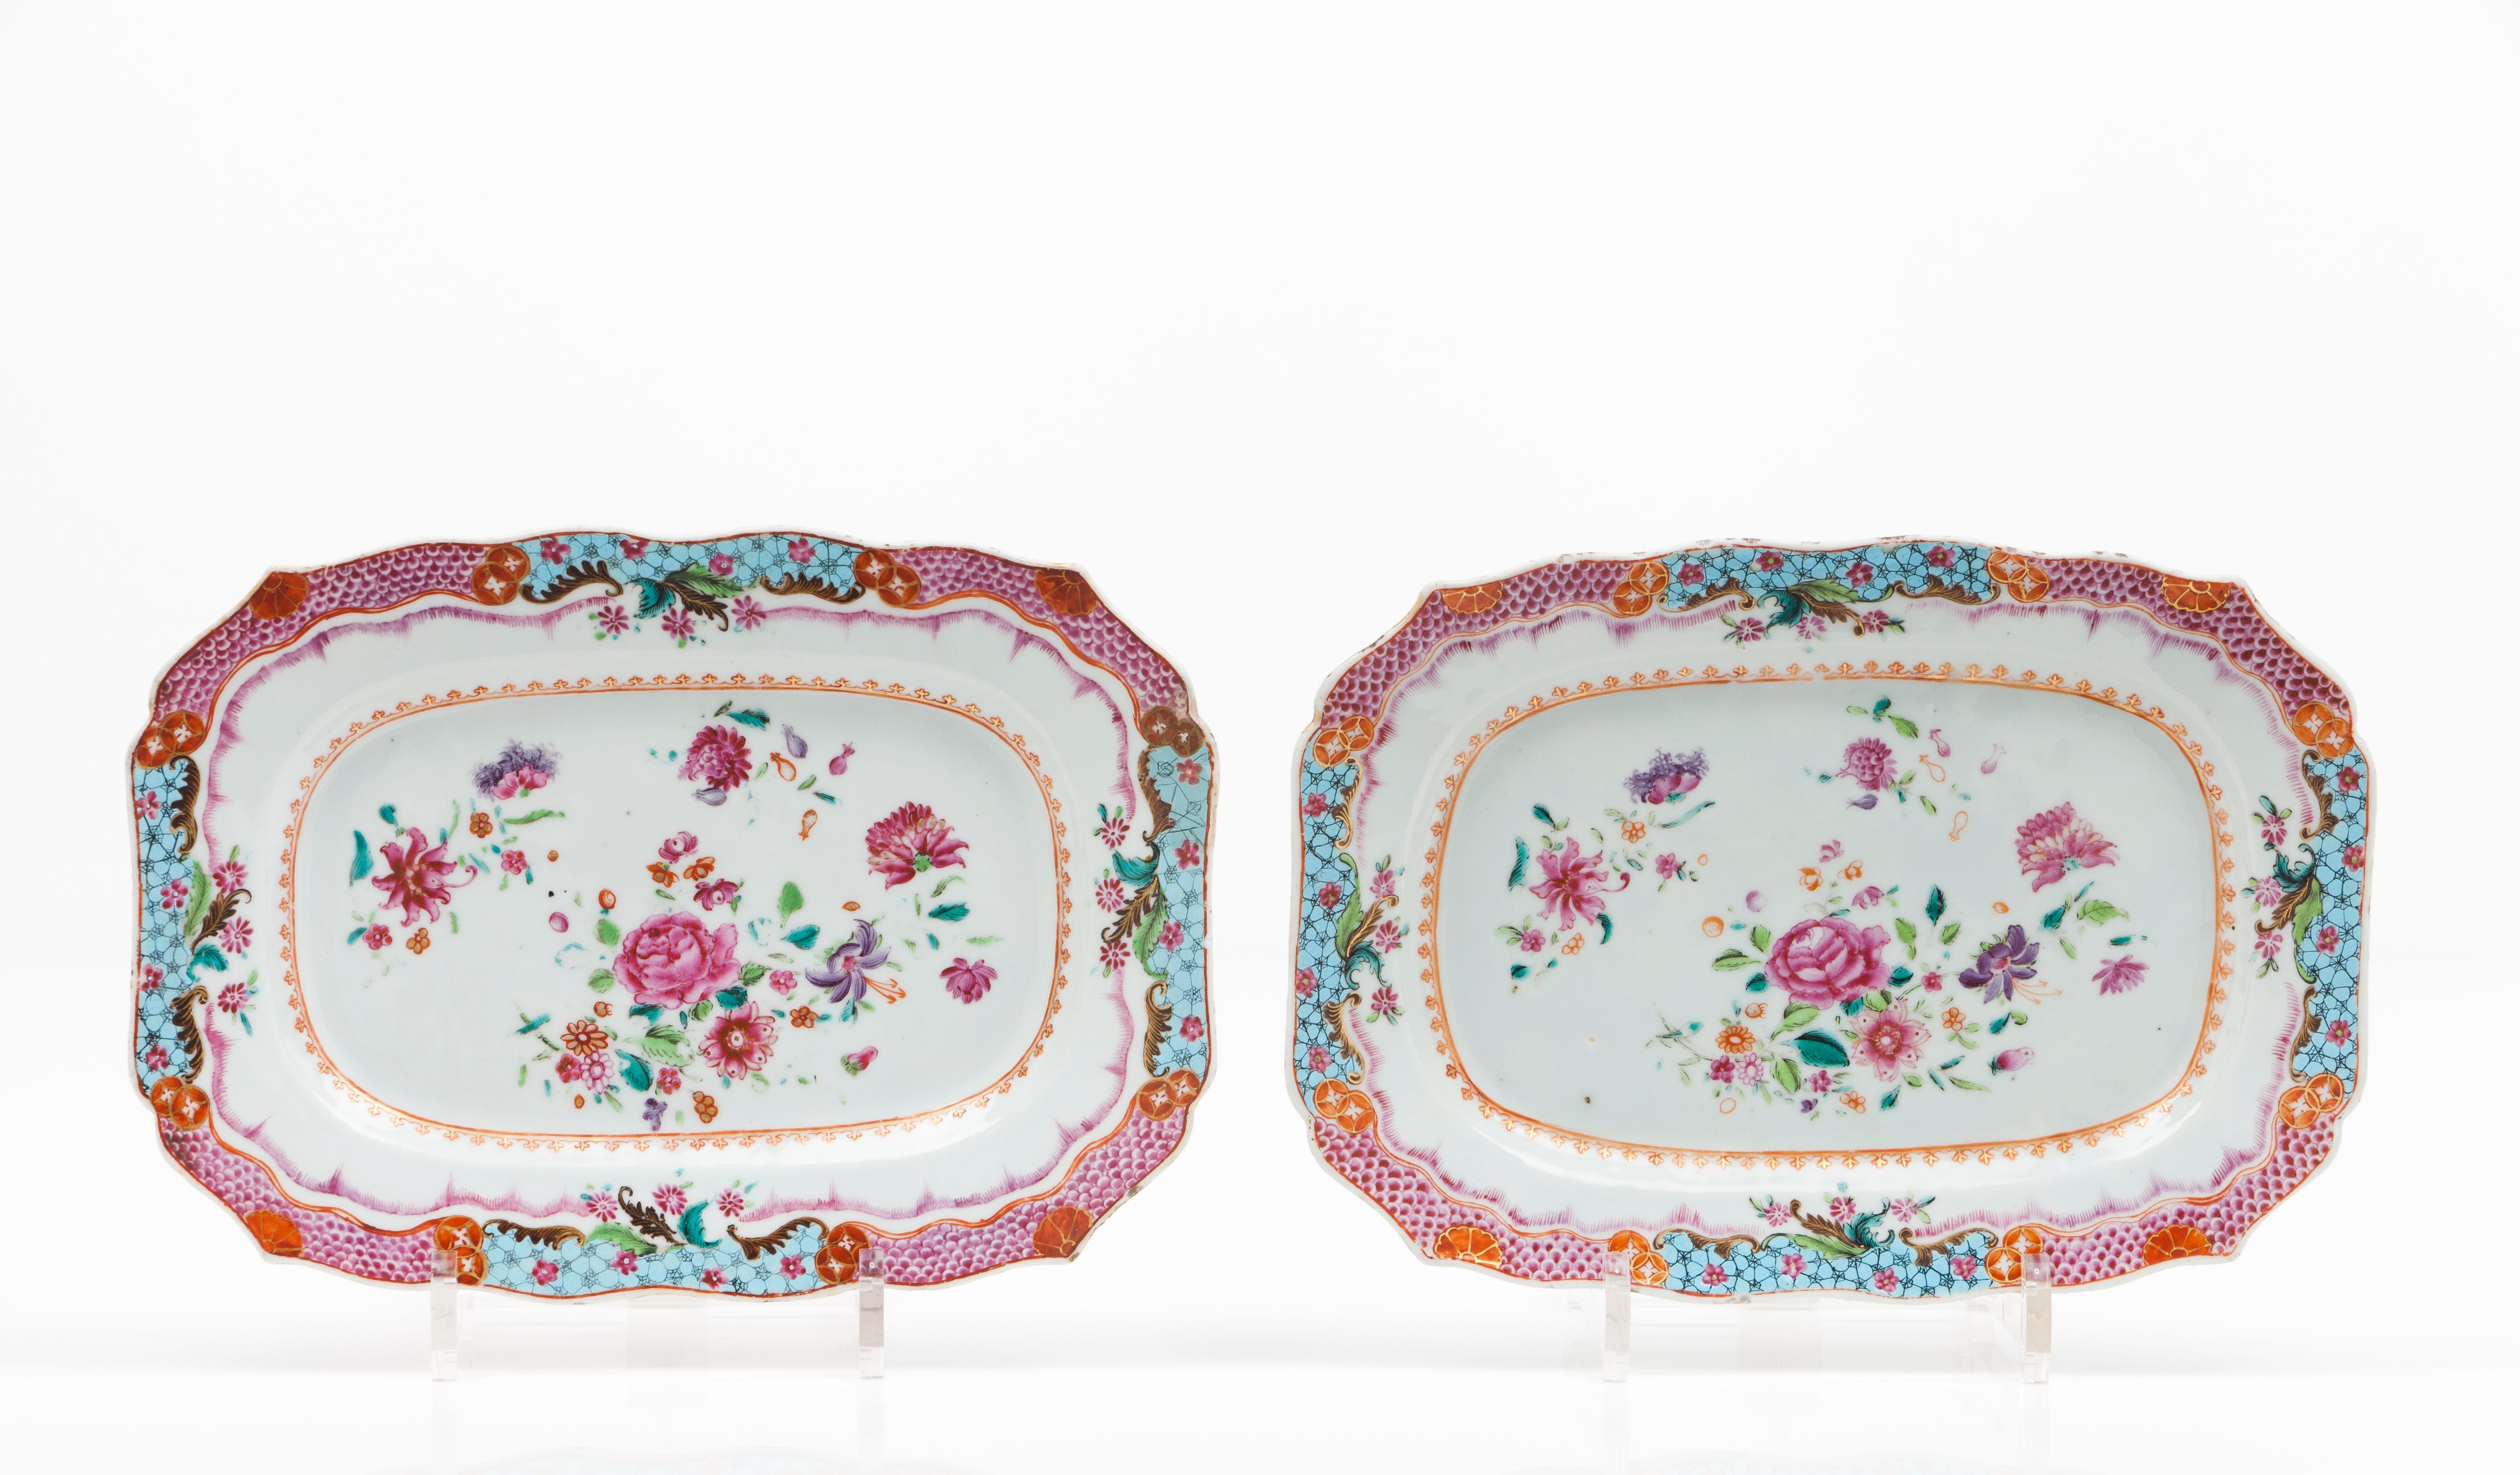 A pair of scalloped serving platters